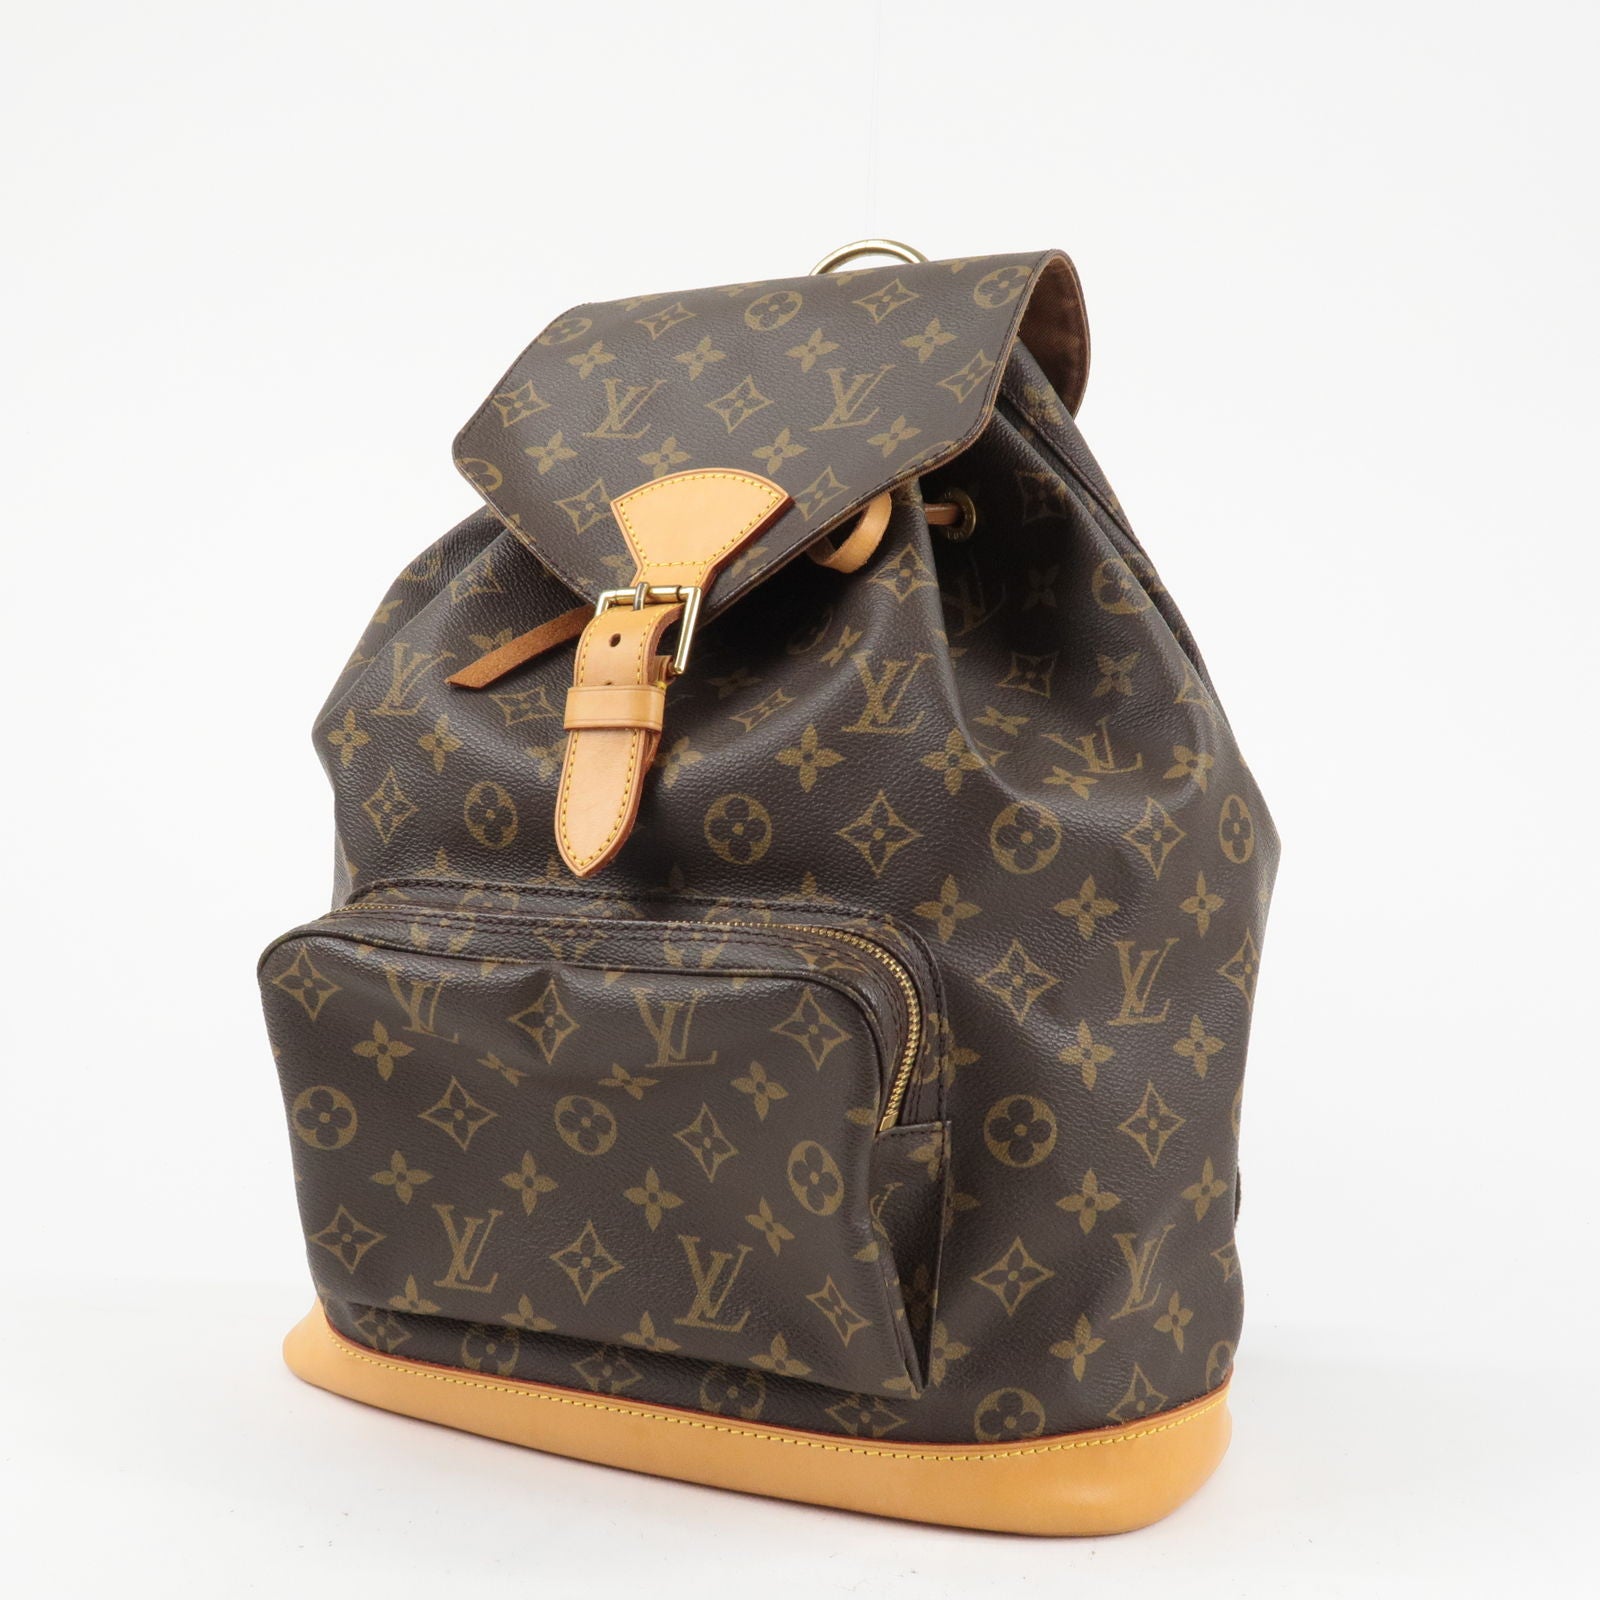 Packing for a Week in the City  Vintage louis vuitton handbags, Louis  vuitton handbags neverfull, Louis vuitton